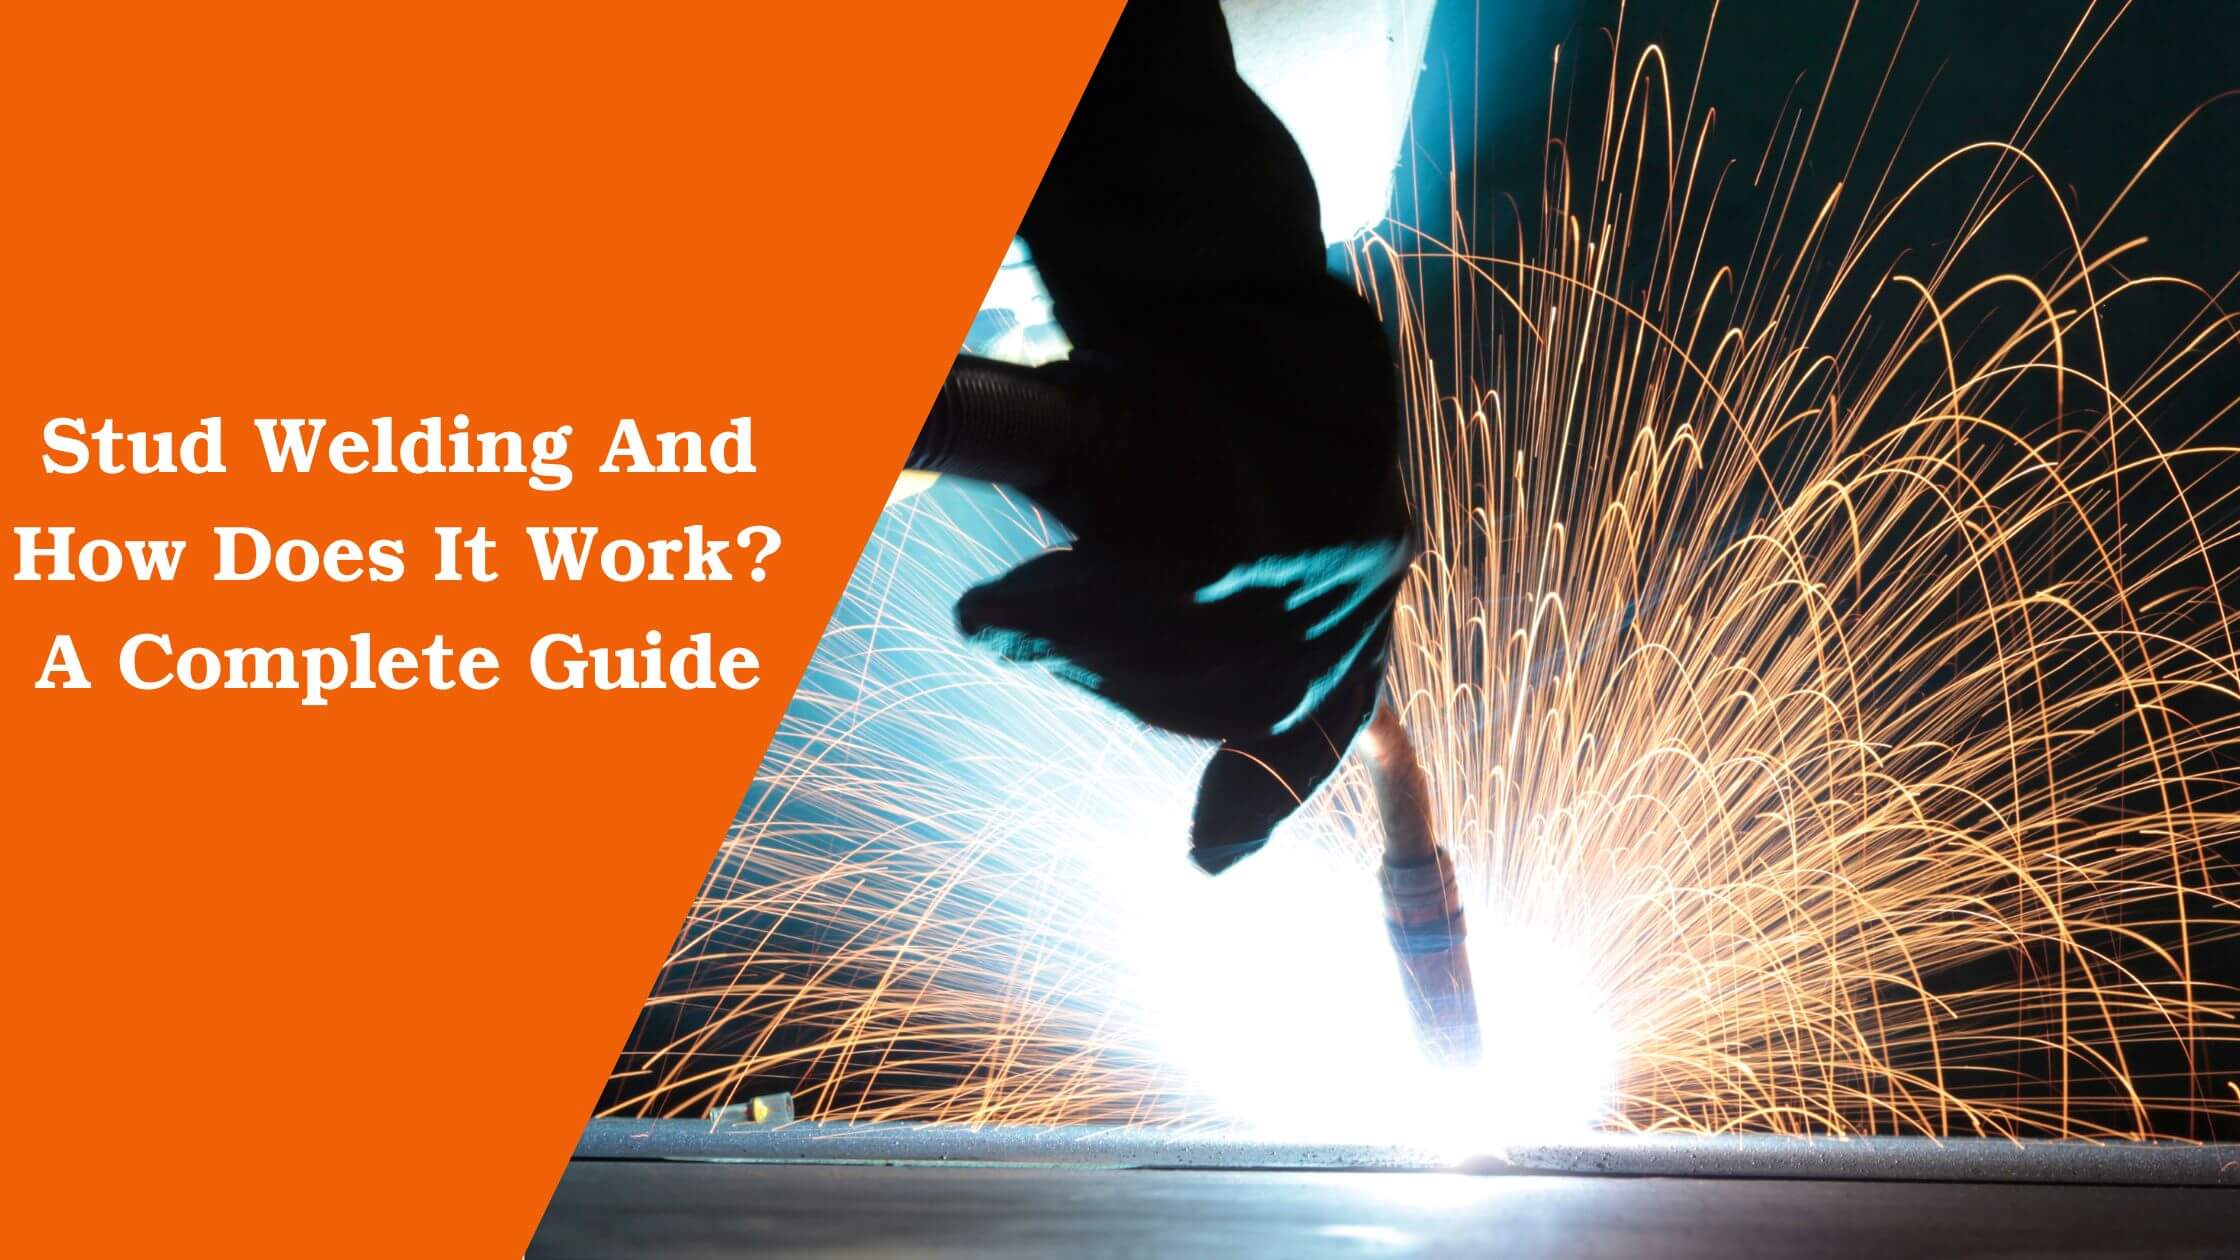 Stud Welding And How Does It Work? A Complete Guide